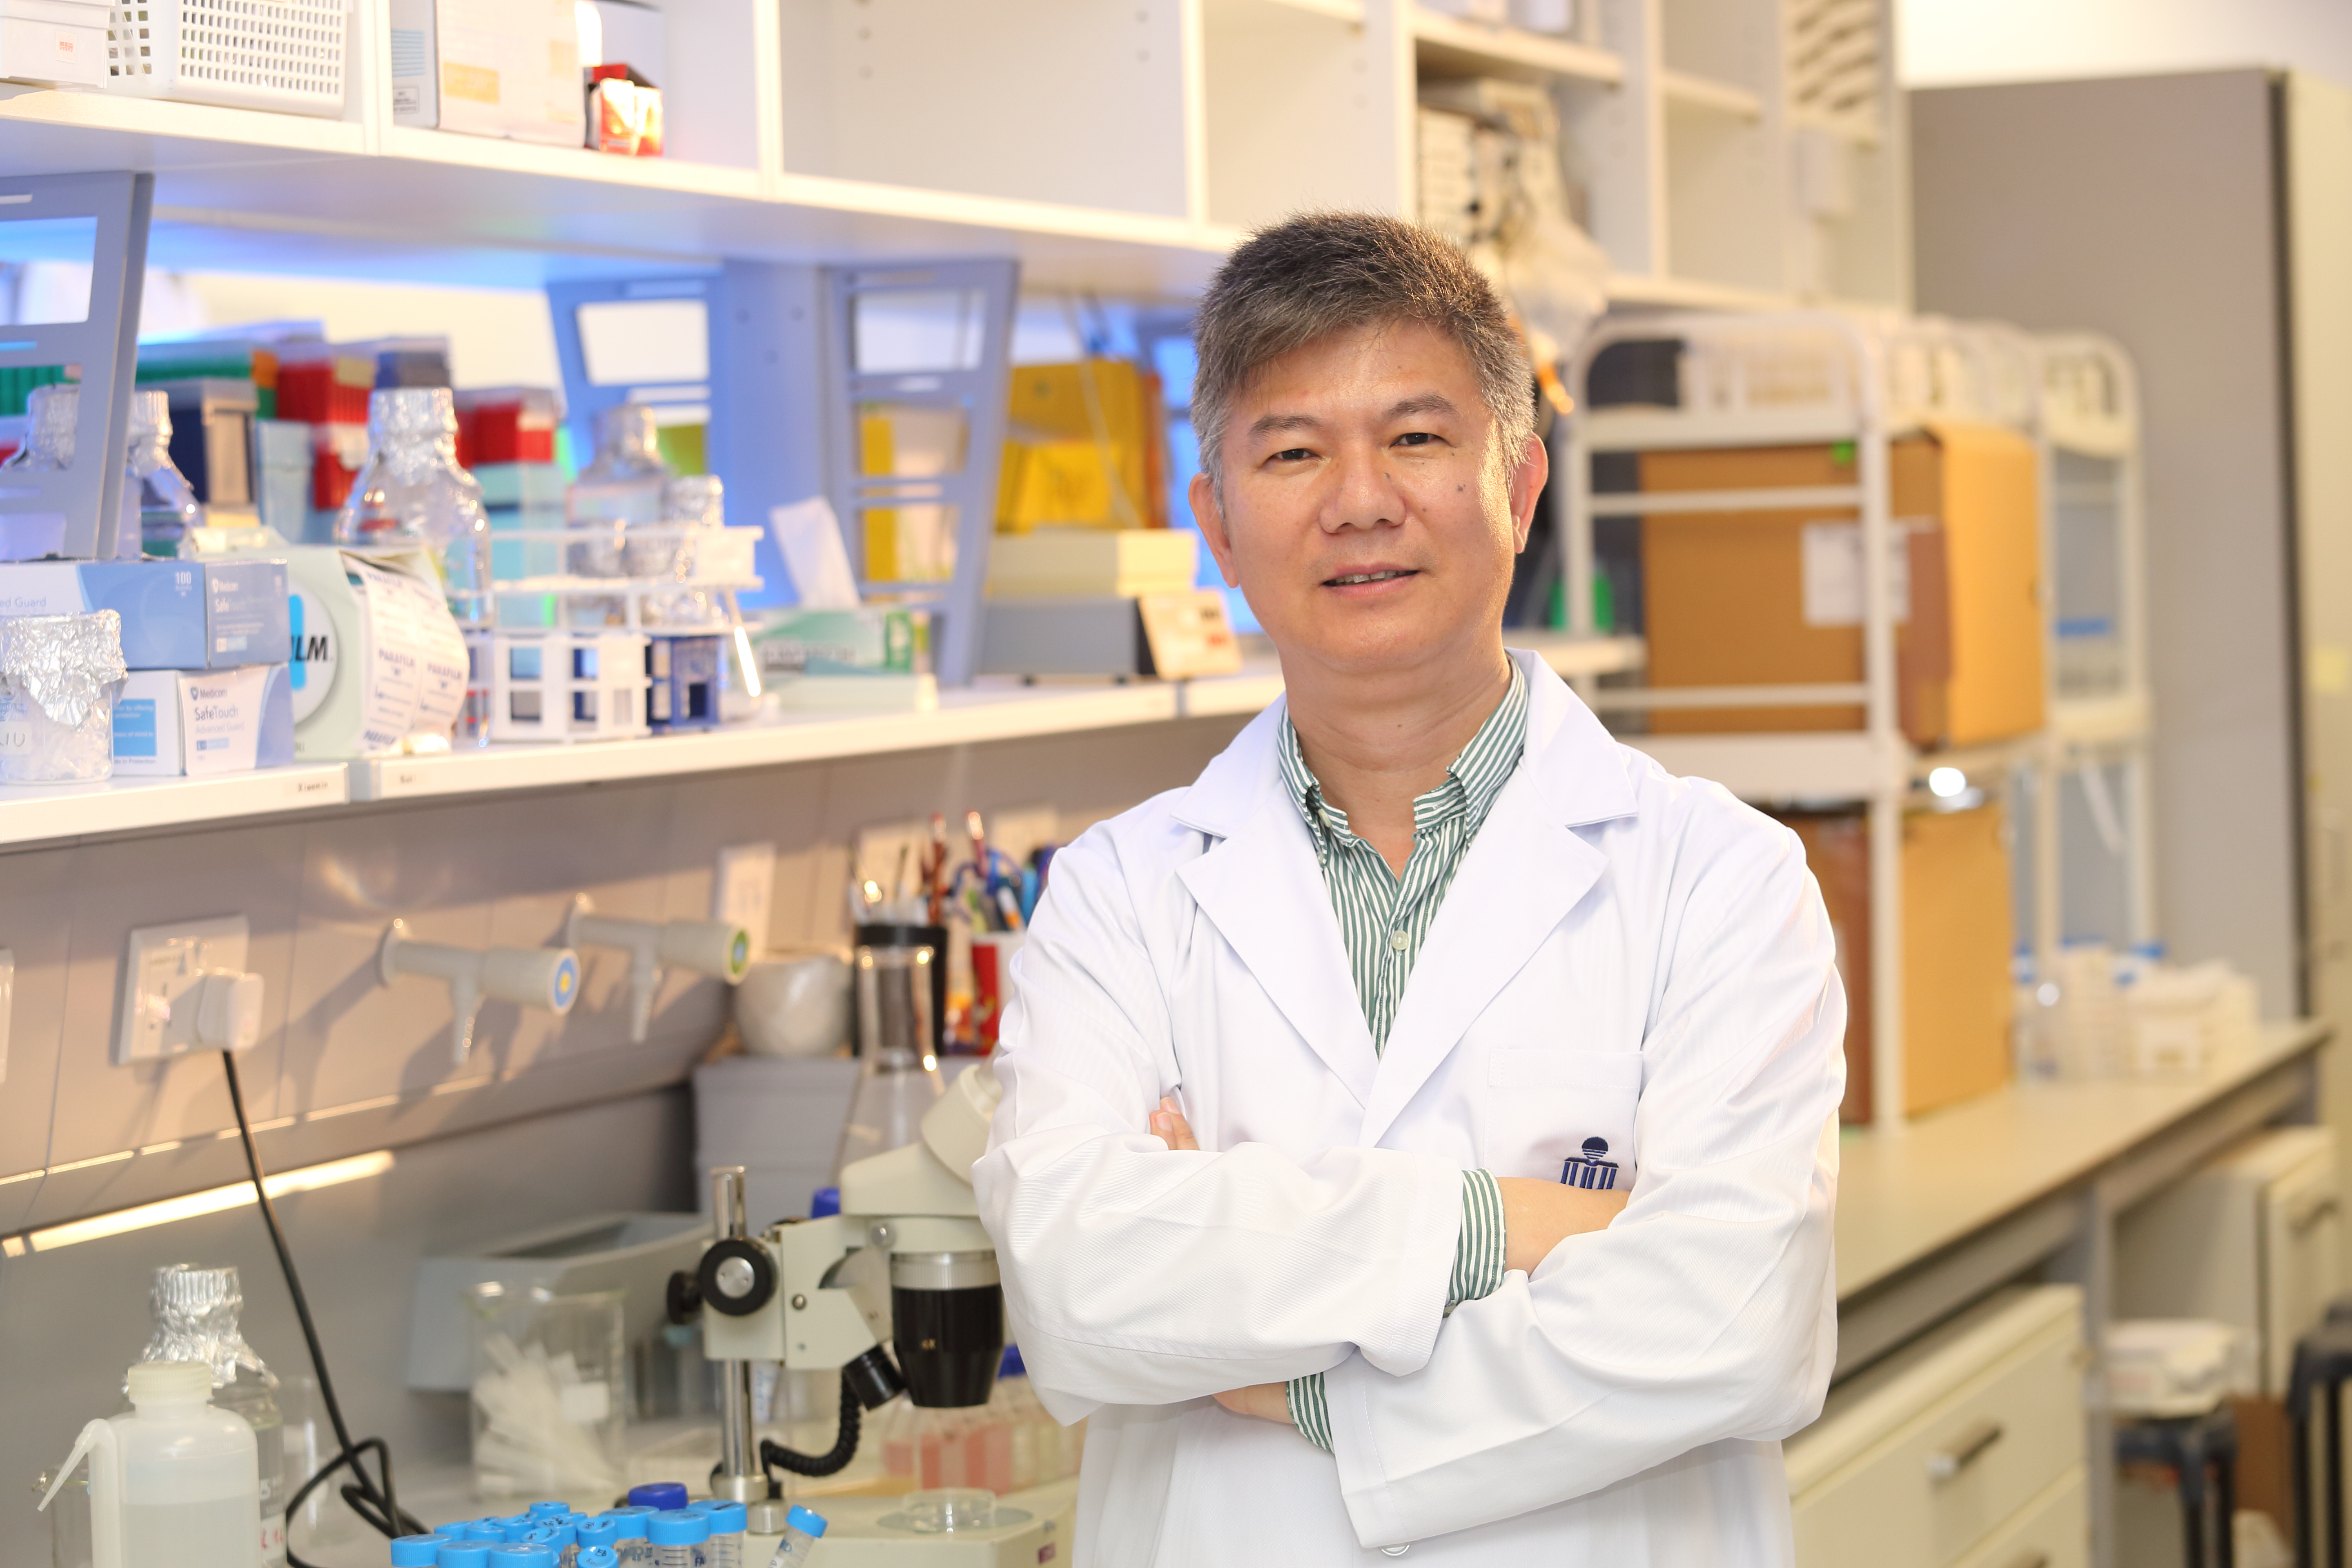 A research led by Prof. LIU Hongbin, Associate Head and Chair Professor of HKUST's Department of Ocean Science, has shown growing dominance of diatom algae in the Pearl River Estuary